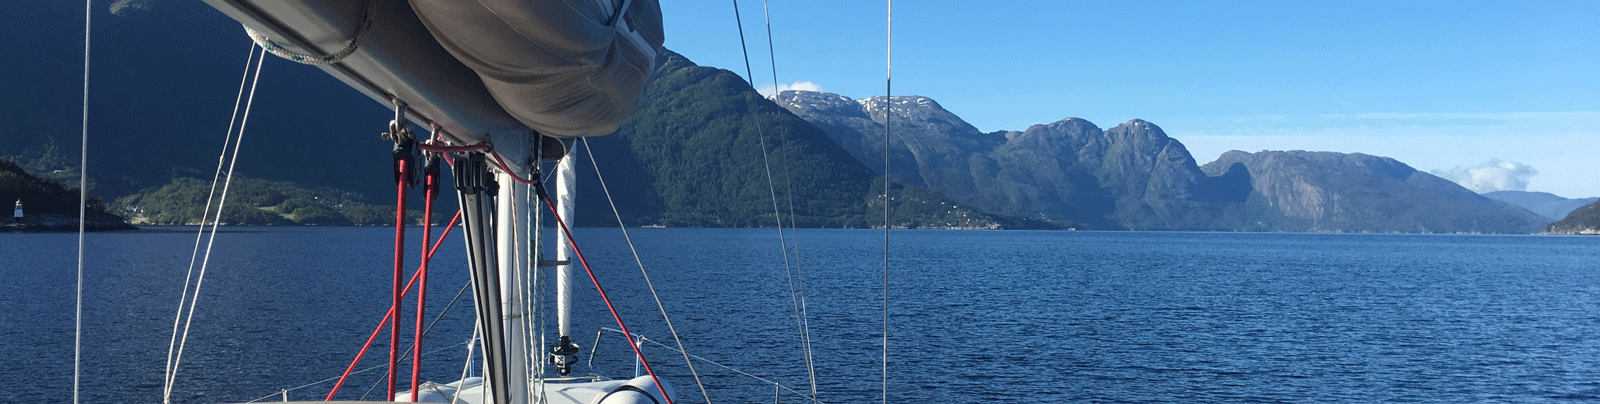 Chartering Norway’s Fjords